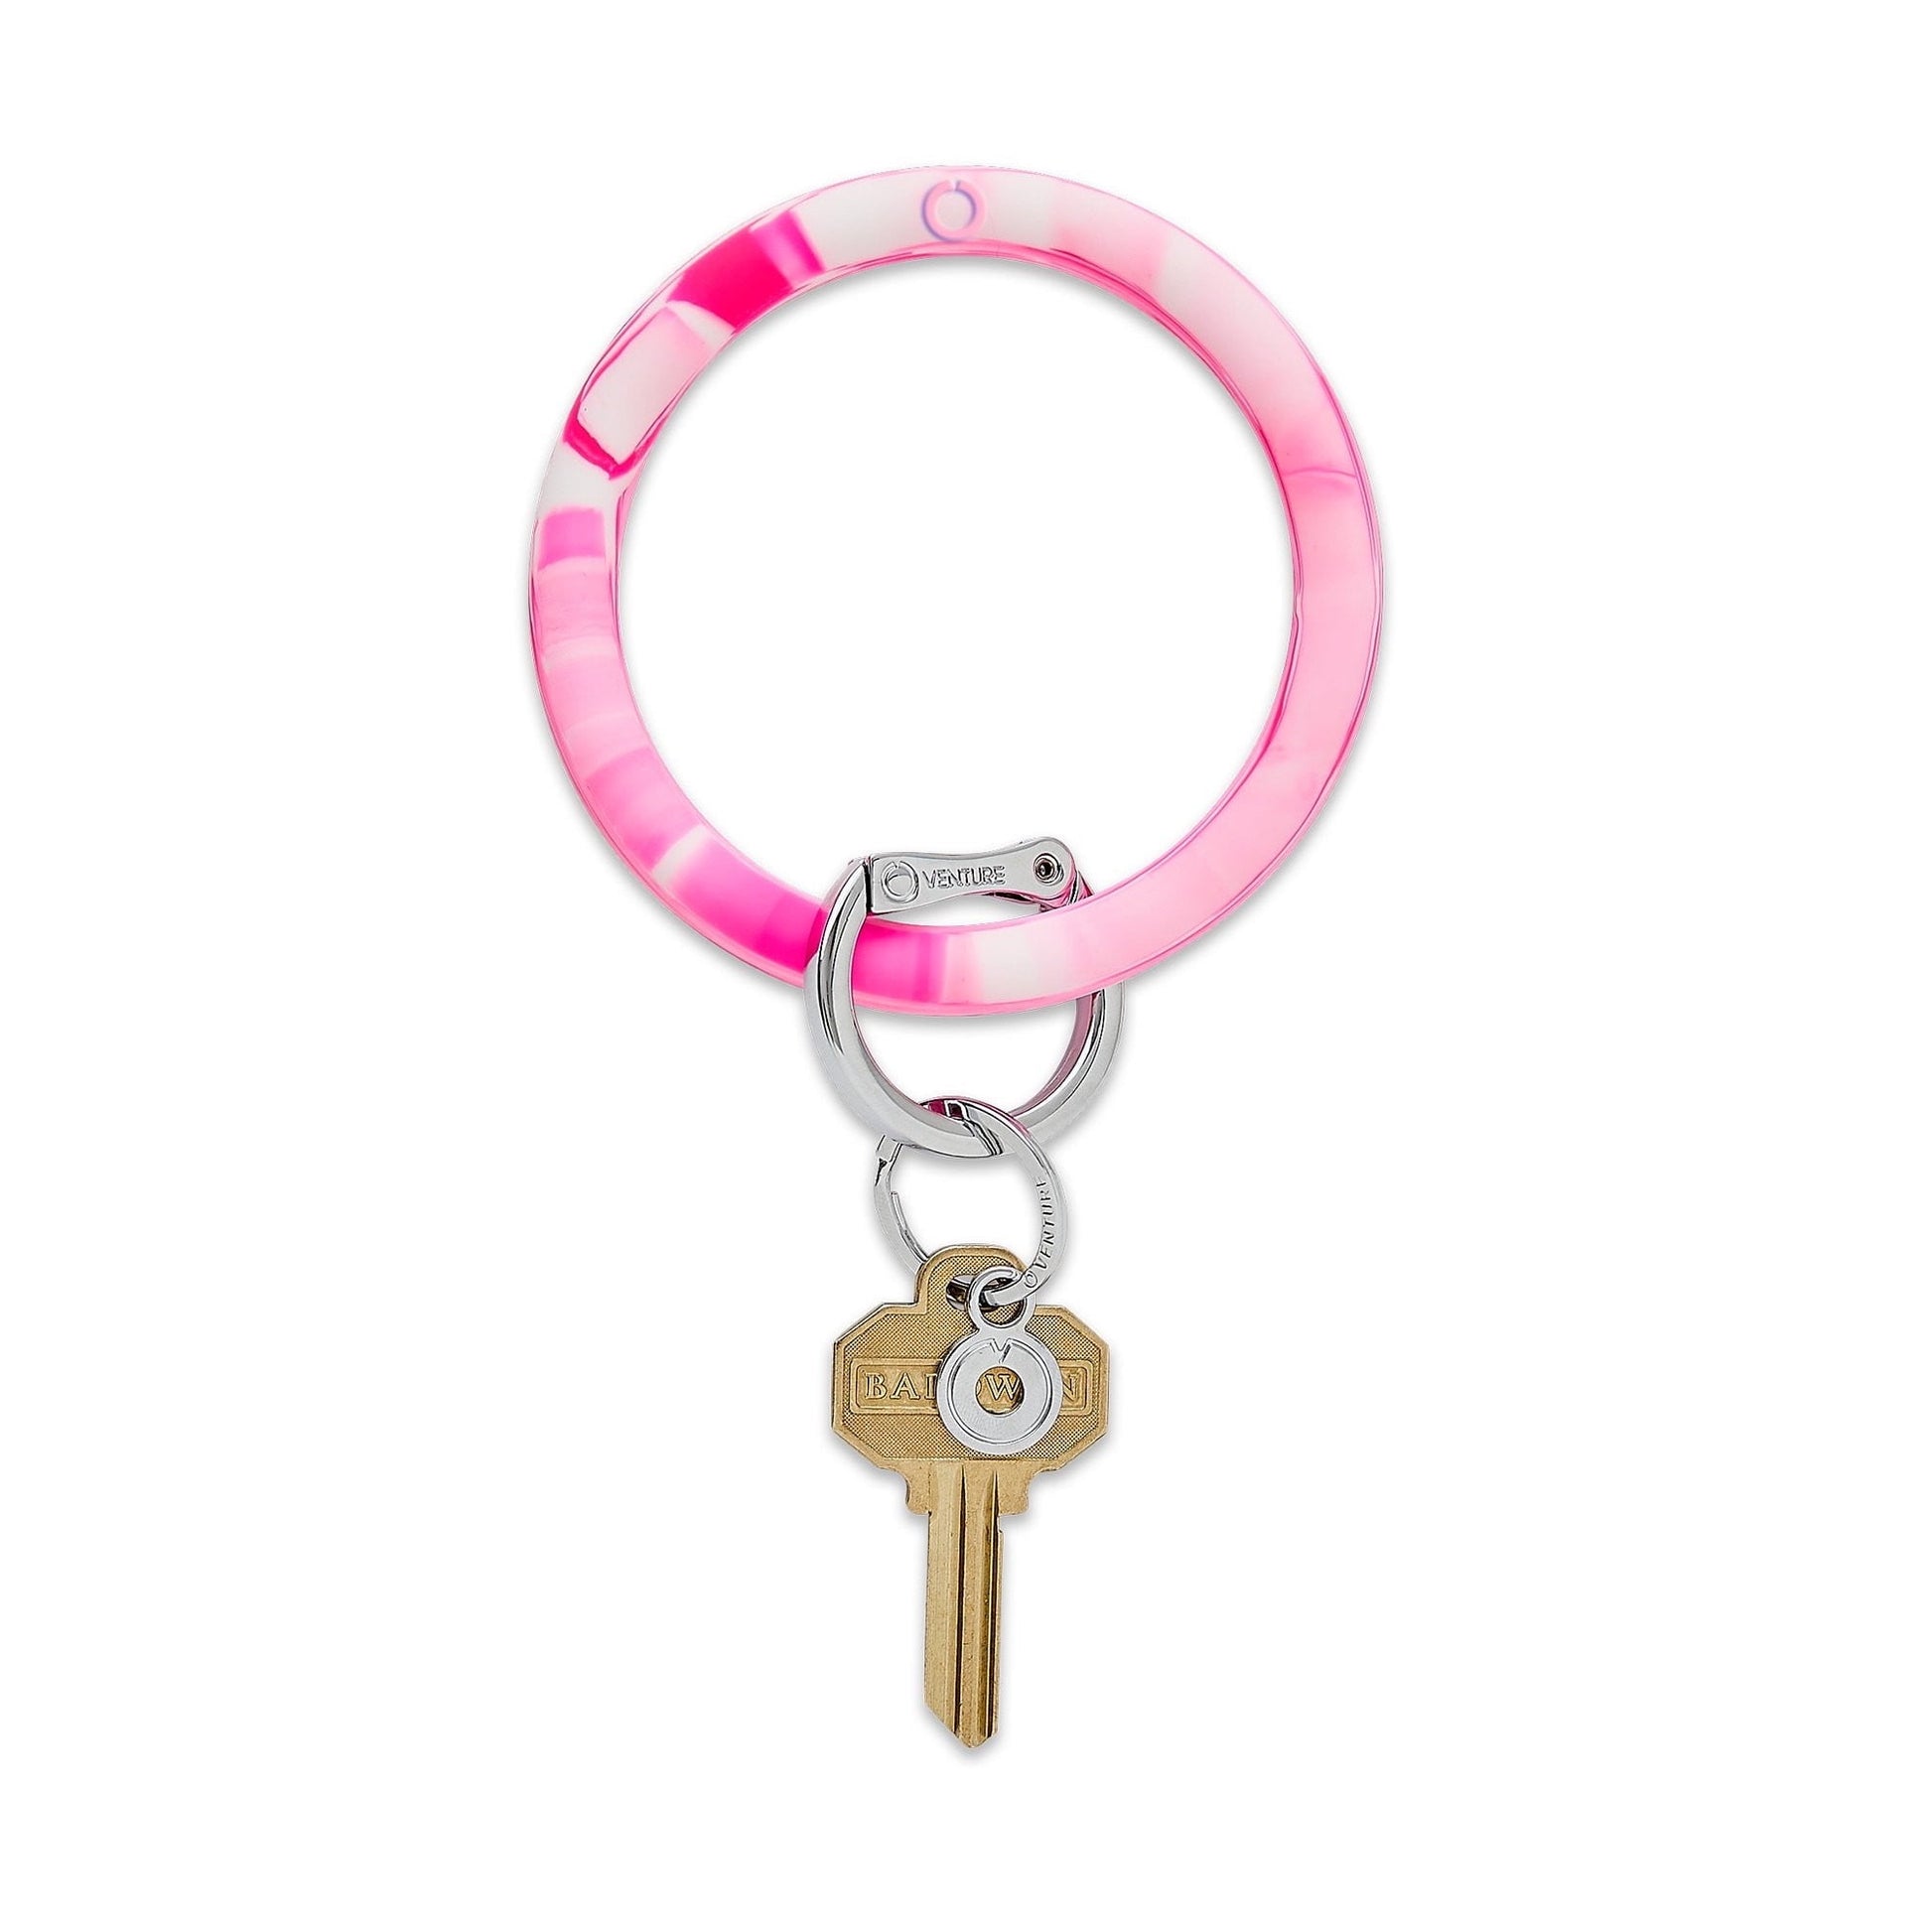 Oventure, The Original Bracelet Keychain, Silicone Big O Key Ring - Marble  Collection